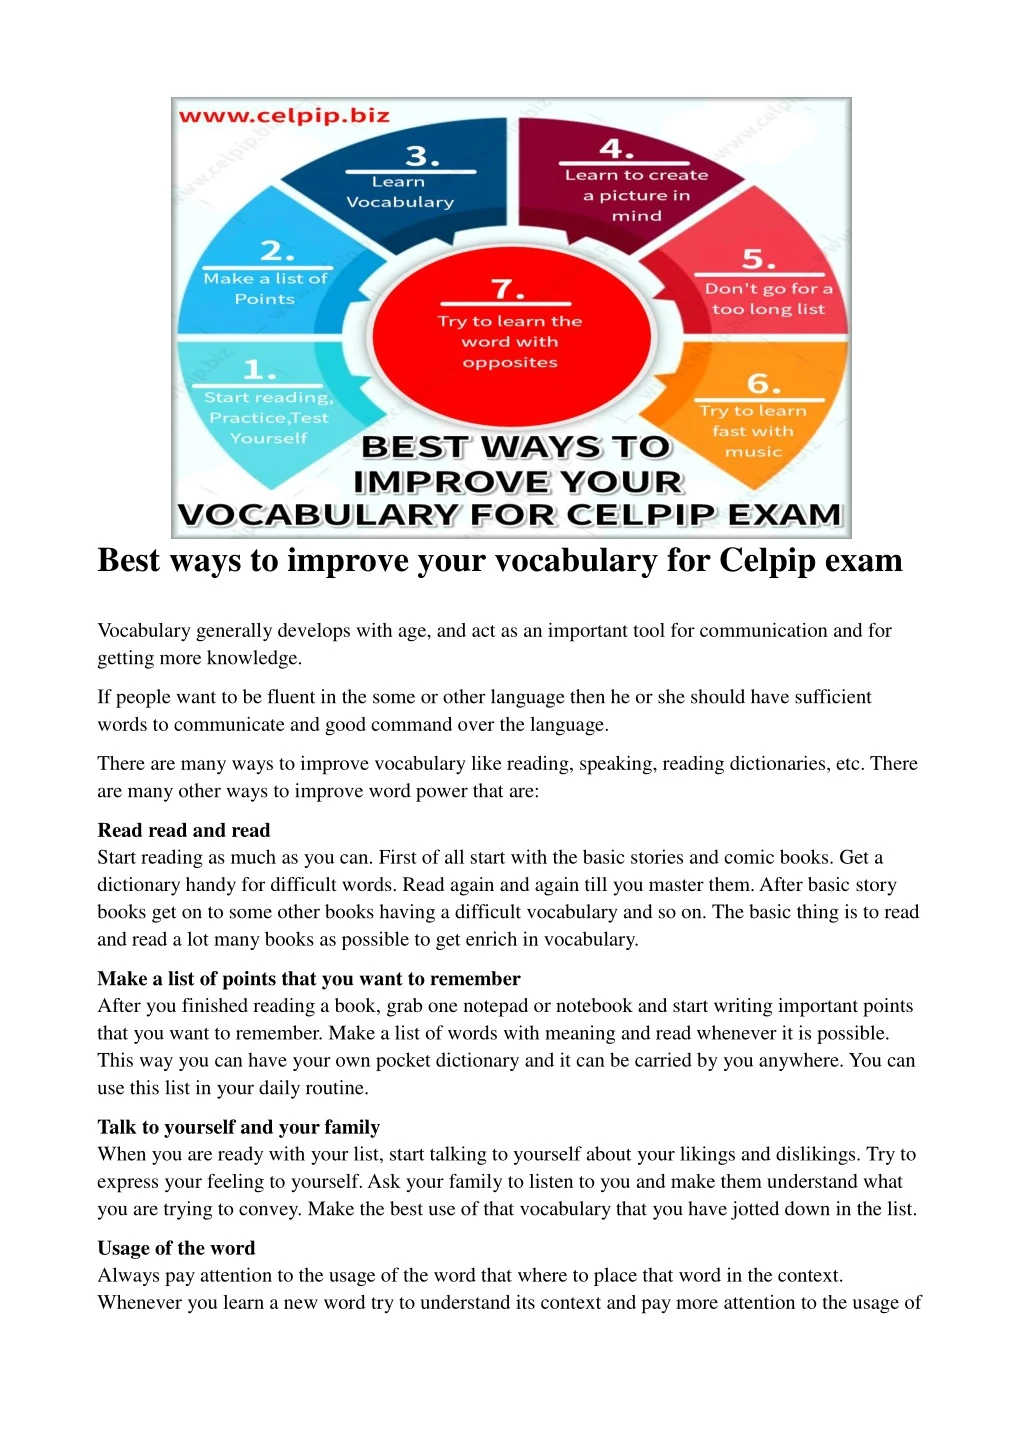 best ways to improve your vocabulary for celpip